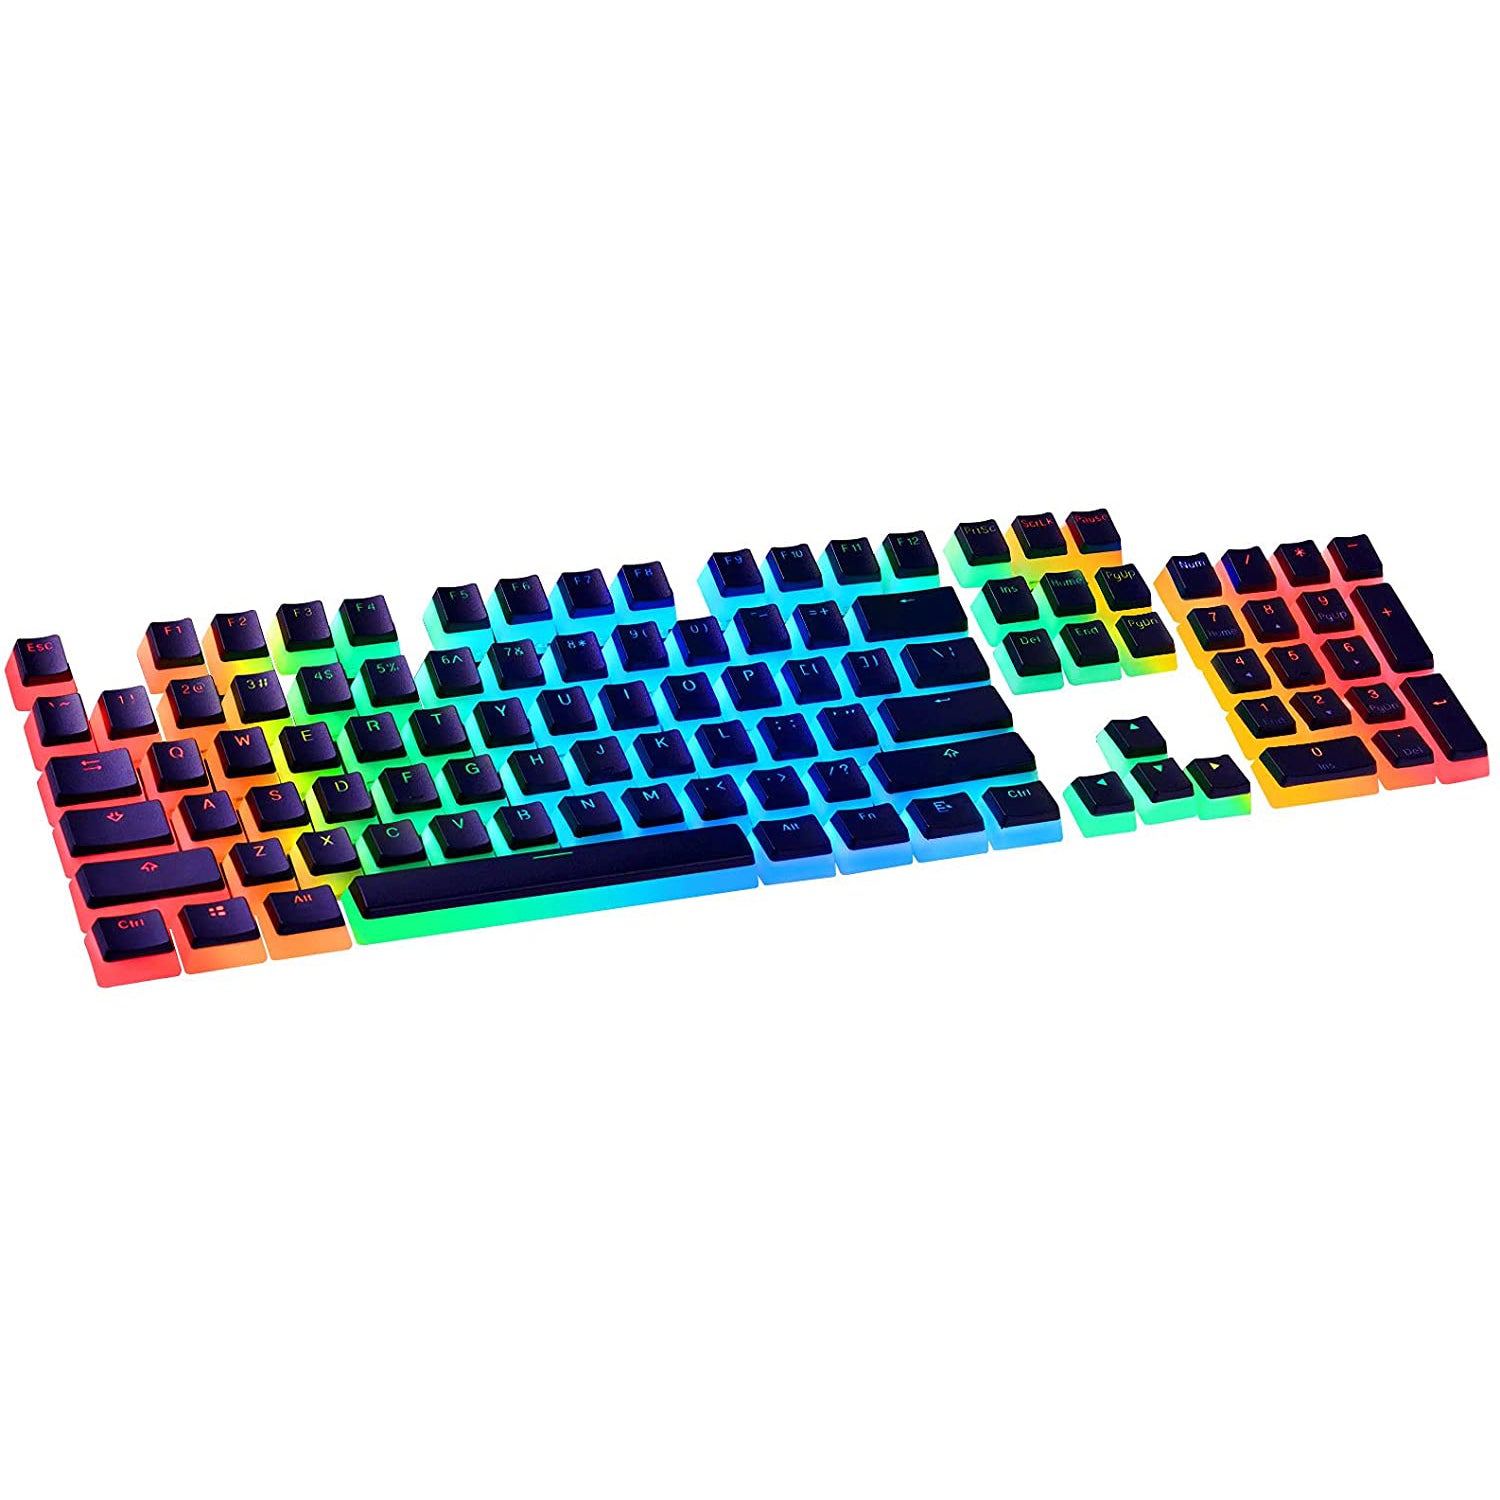 HAVIT KC22 PBT Keycaps with Puller - Pudding, Double Shot, for Cherry